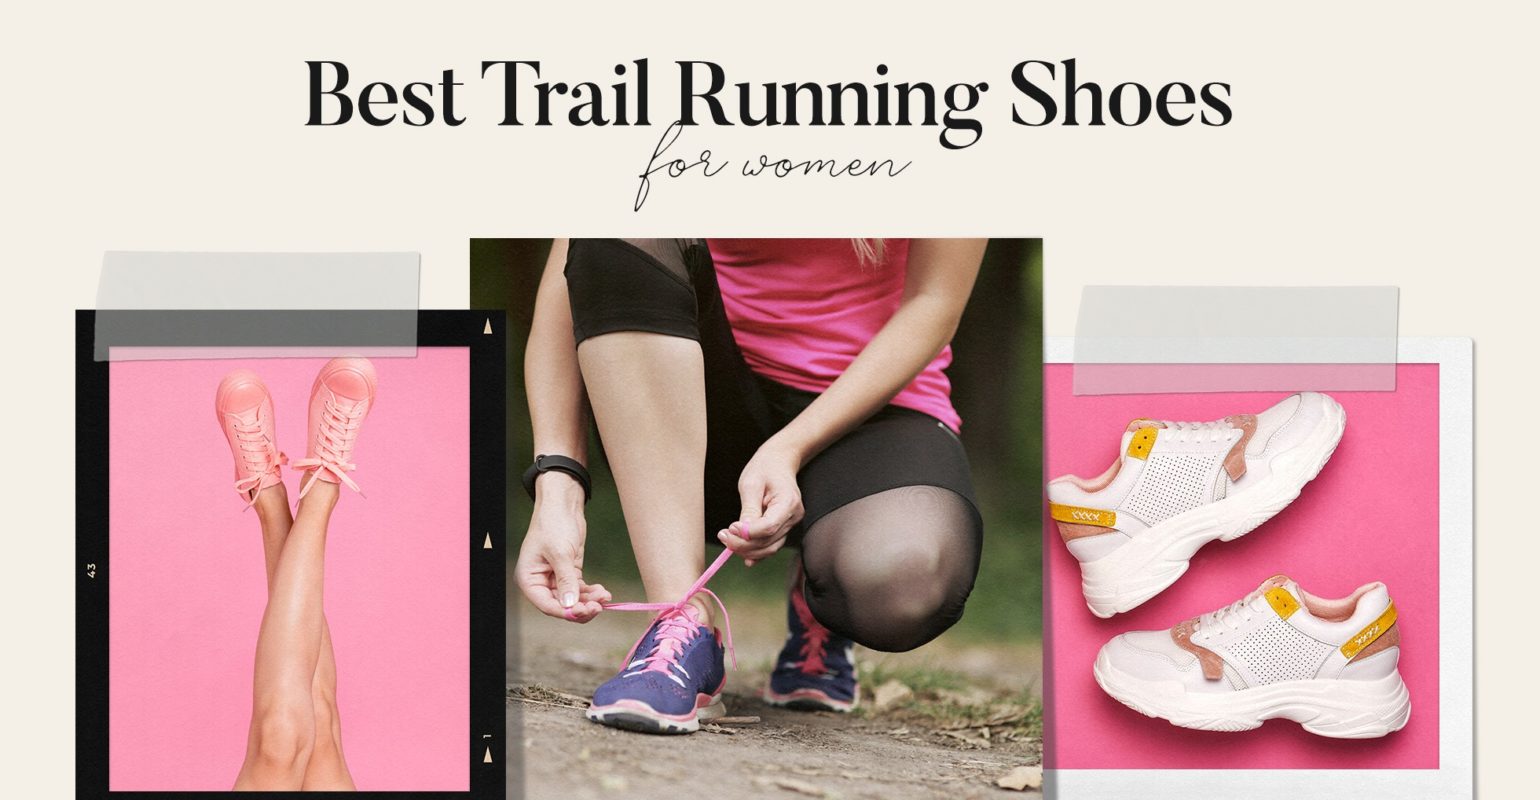 Best Trail Running Shoes for Women Review